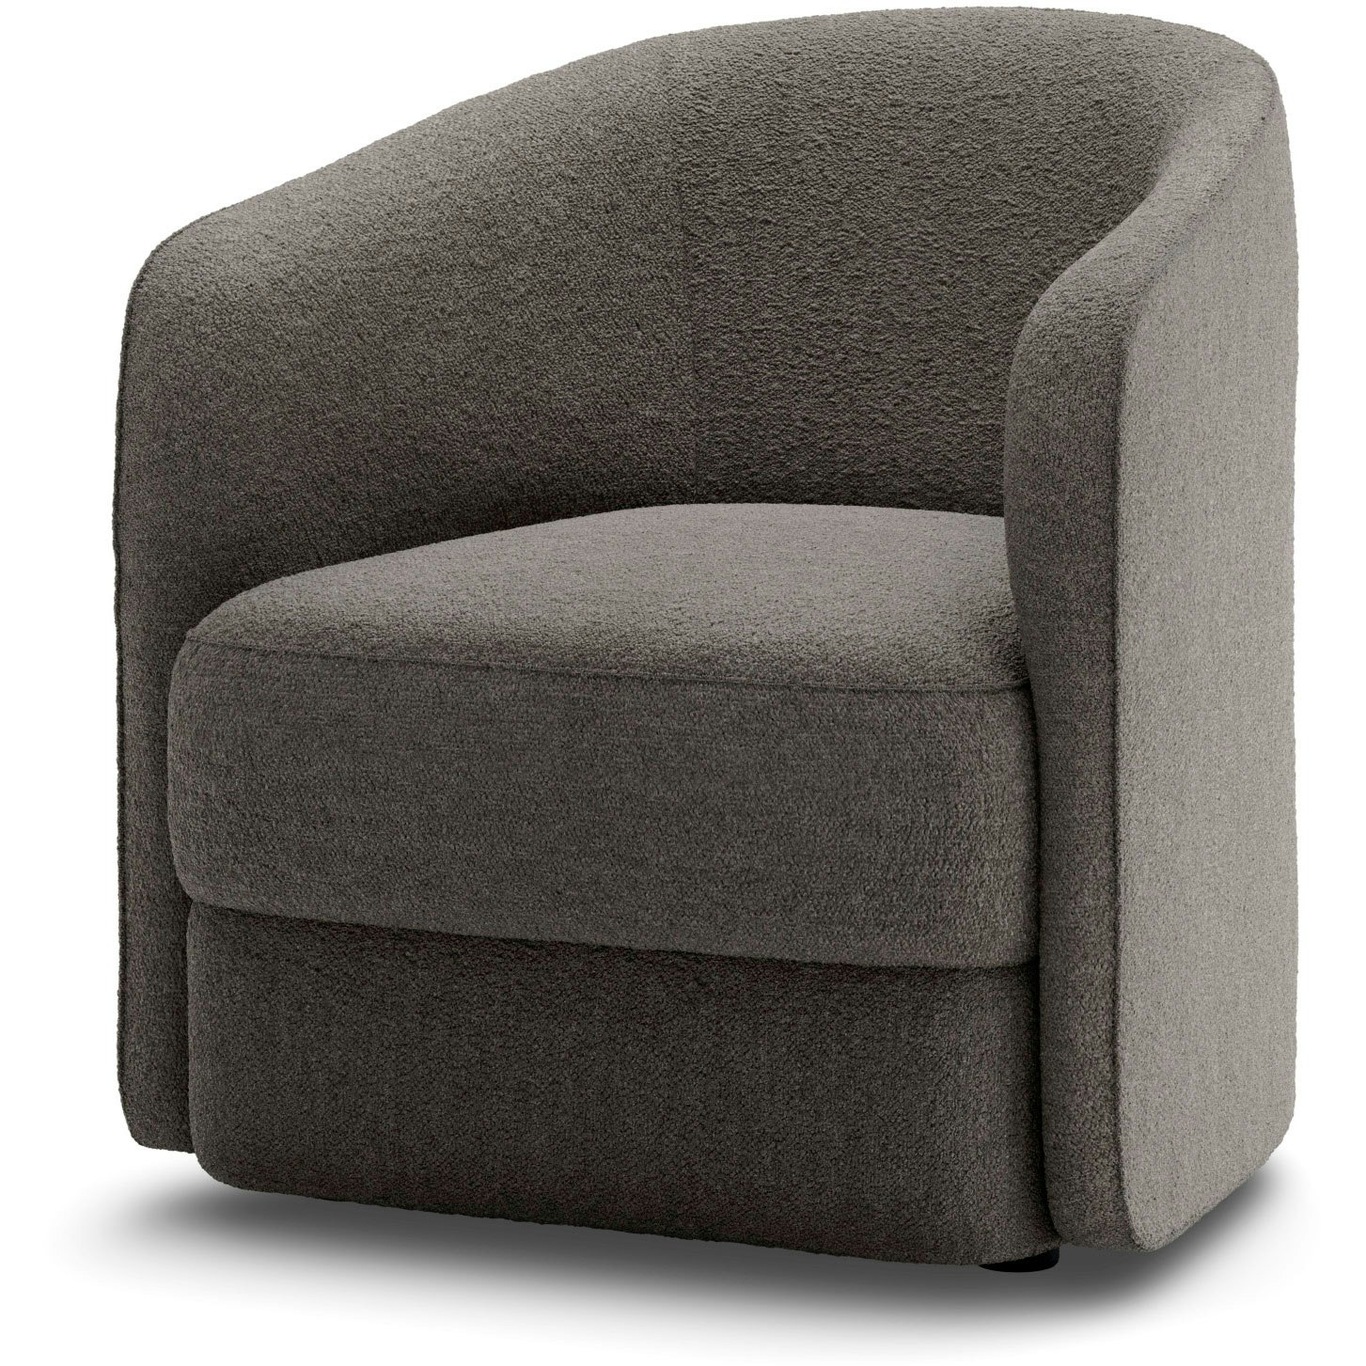 Covent Lounge Chair Narrow, Dark Taupe